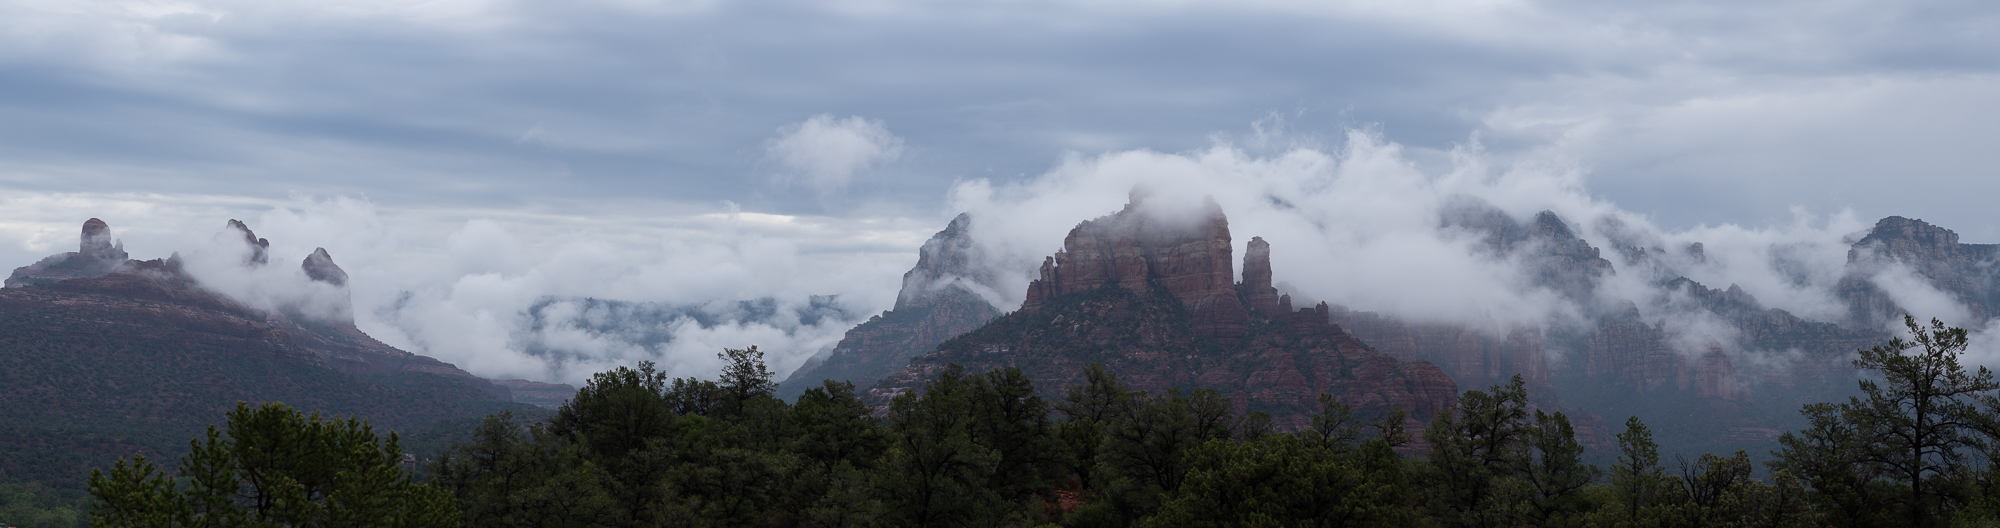 “Monsoon Clouds Over the Mogollon Rim”, RAW image